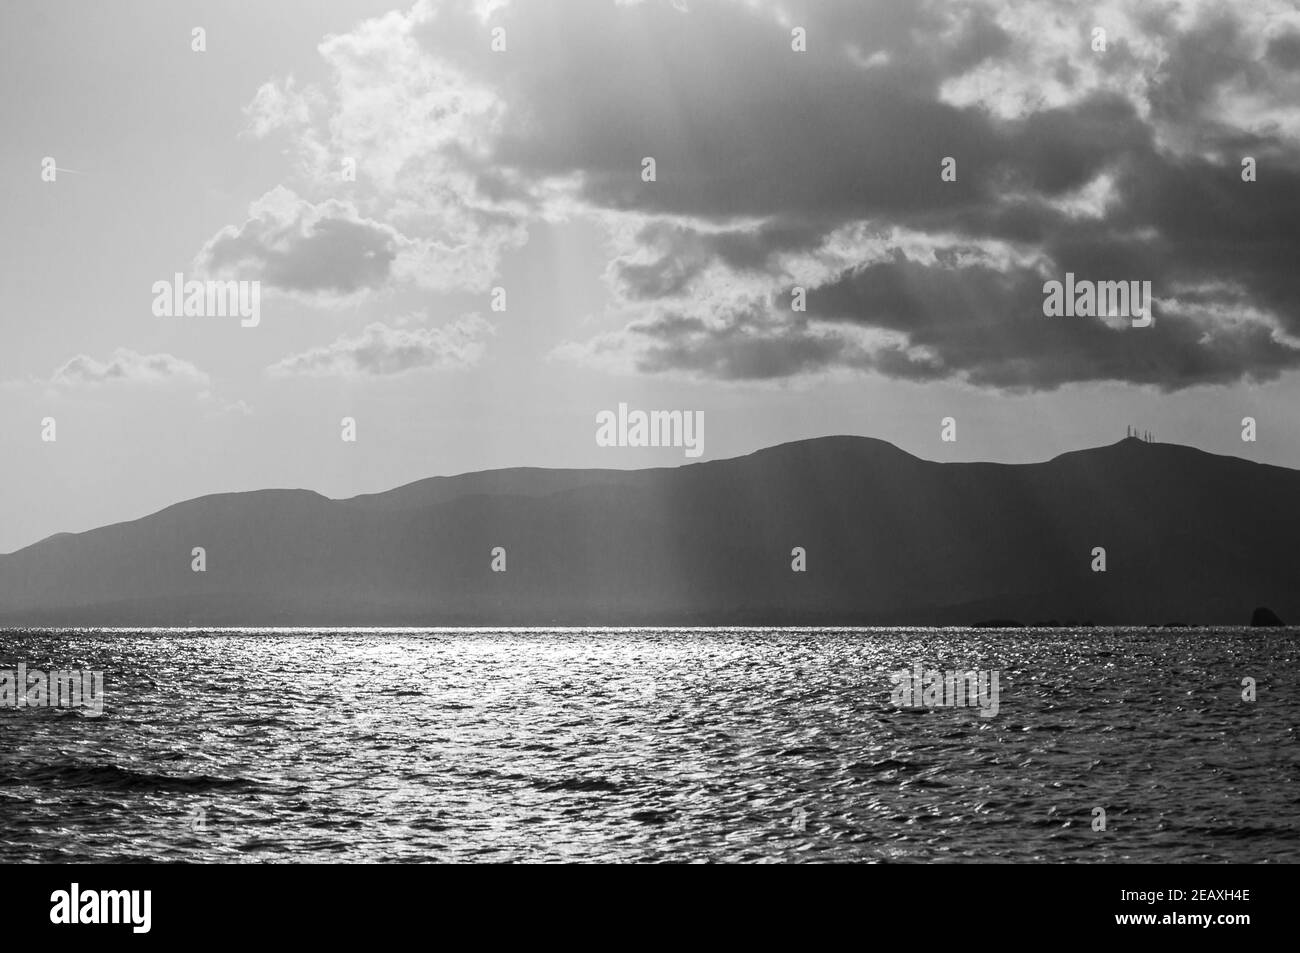 Wonderful sunlight in black and white - holiday photo with an awesome sunset over the sea, the warm sun is shining through the clouds. Stock Photo